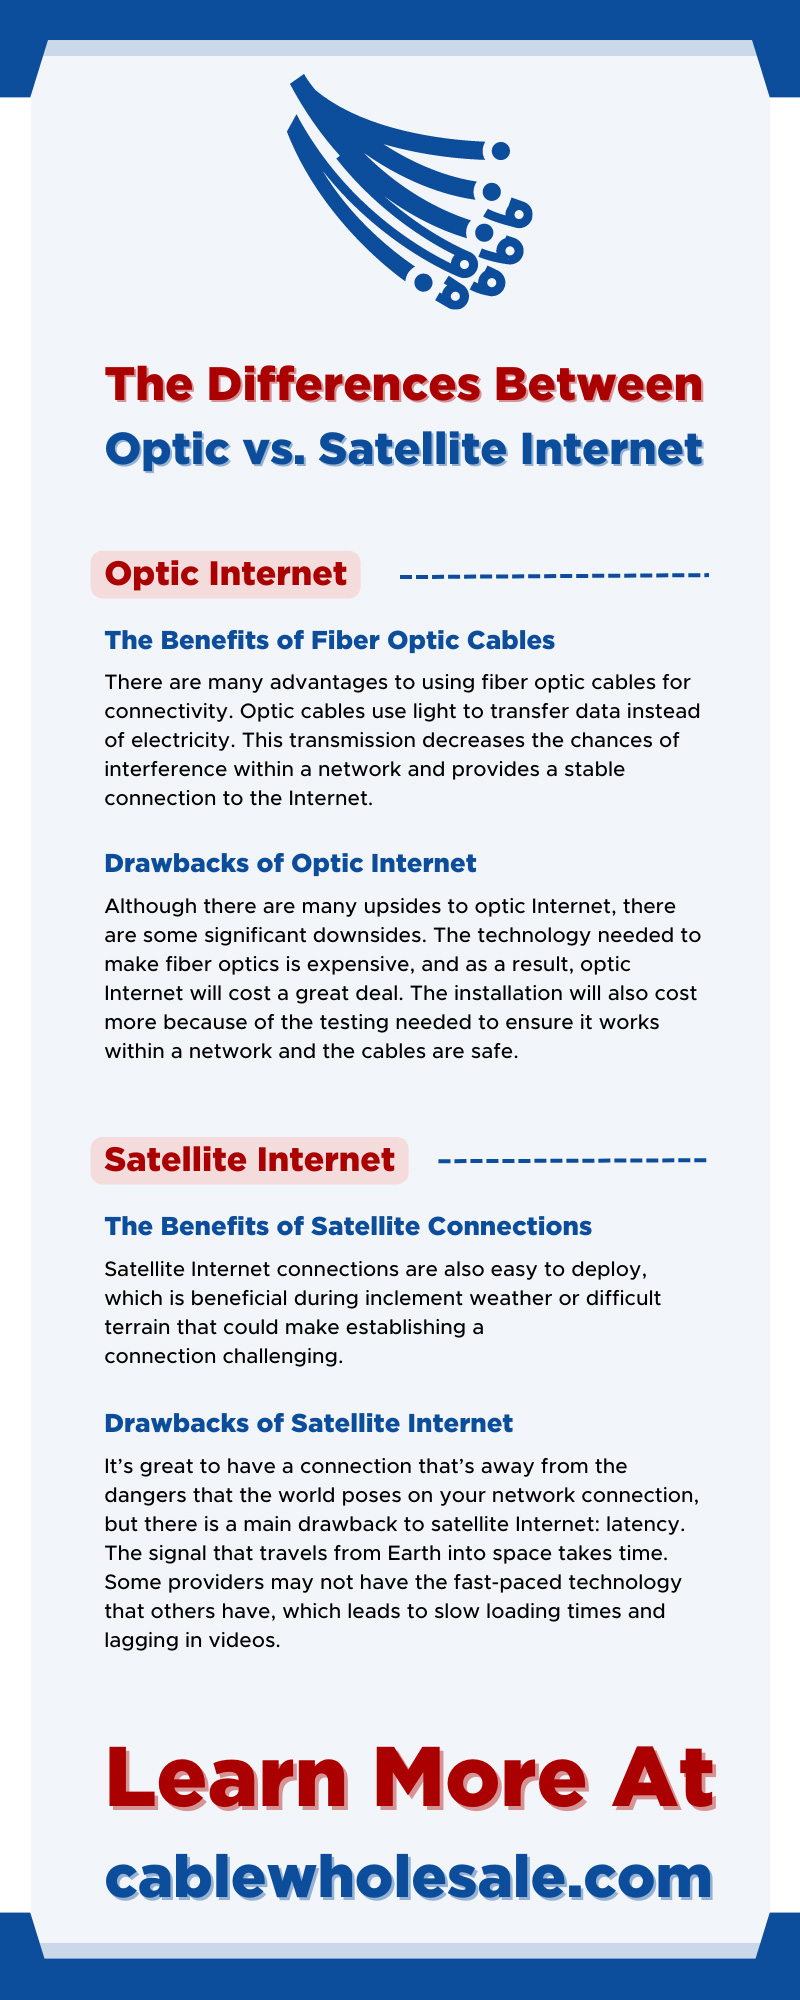 The Differences Between Optic vs. Satellite Internet